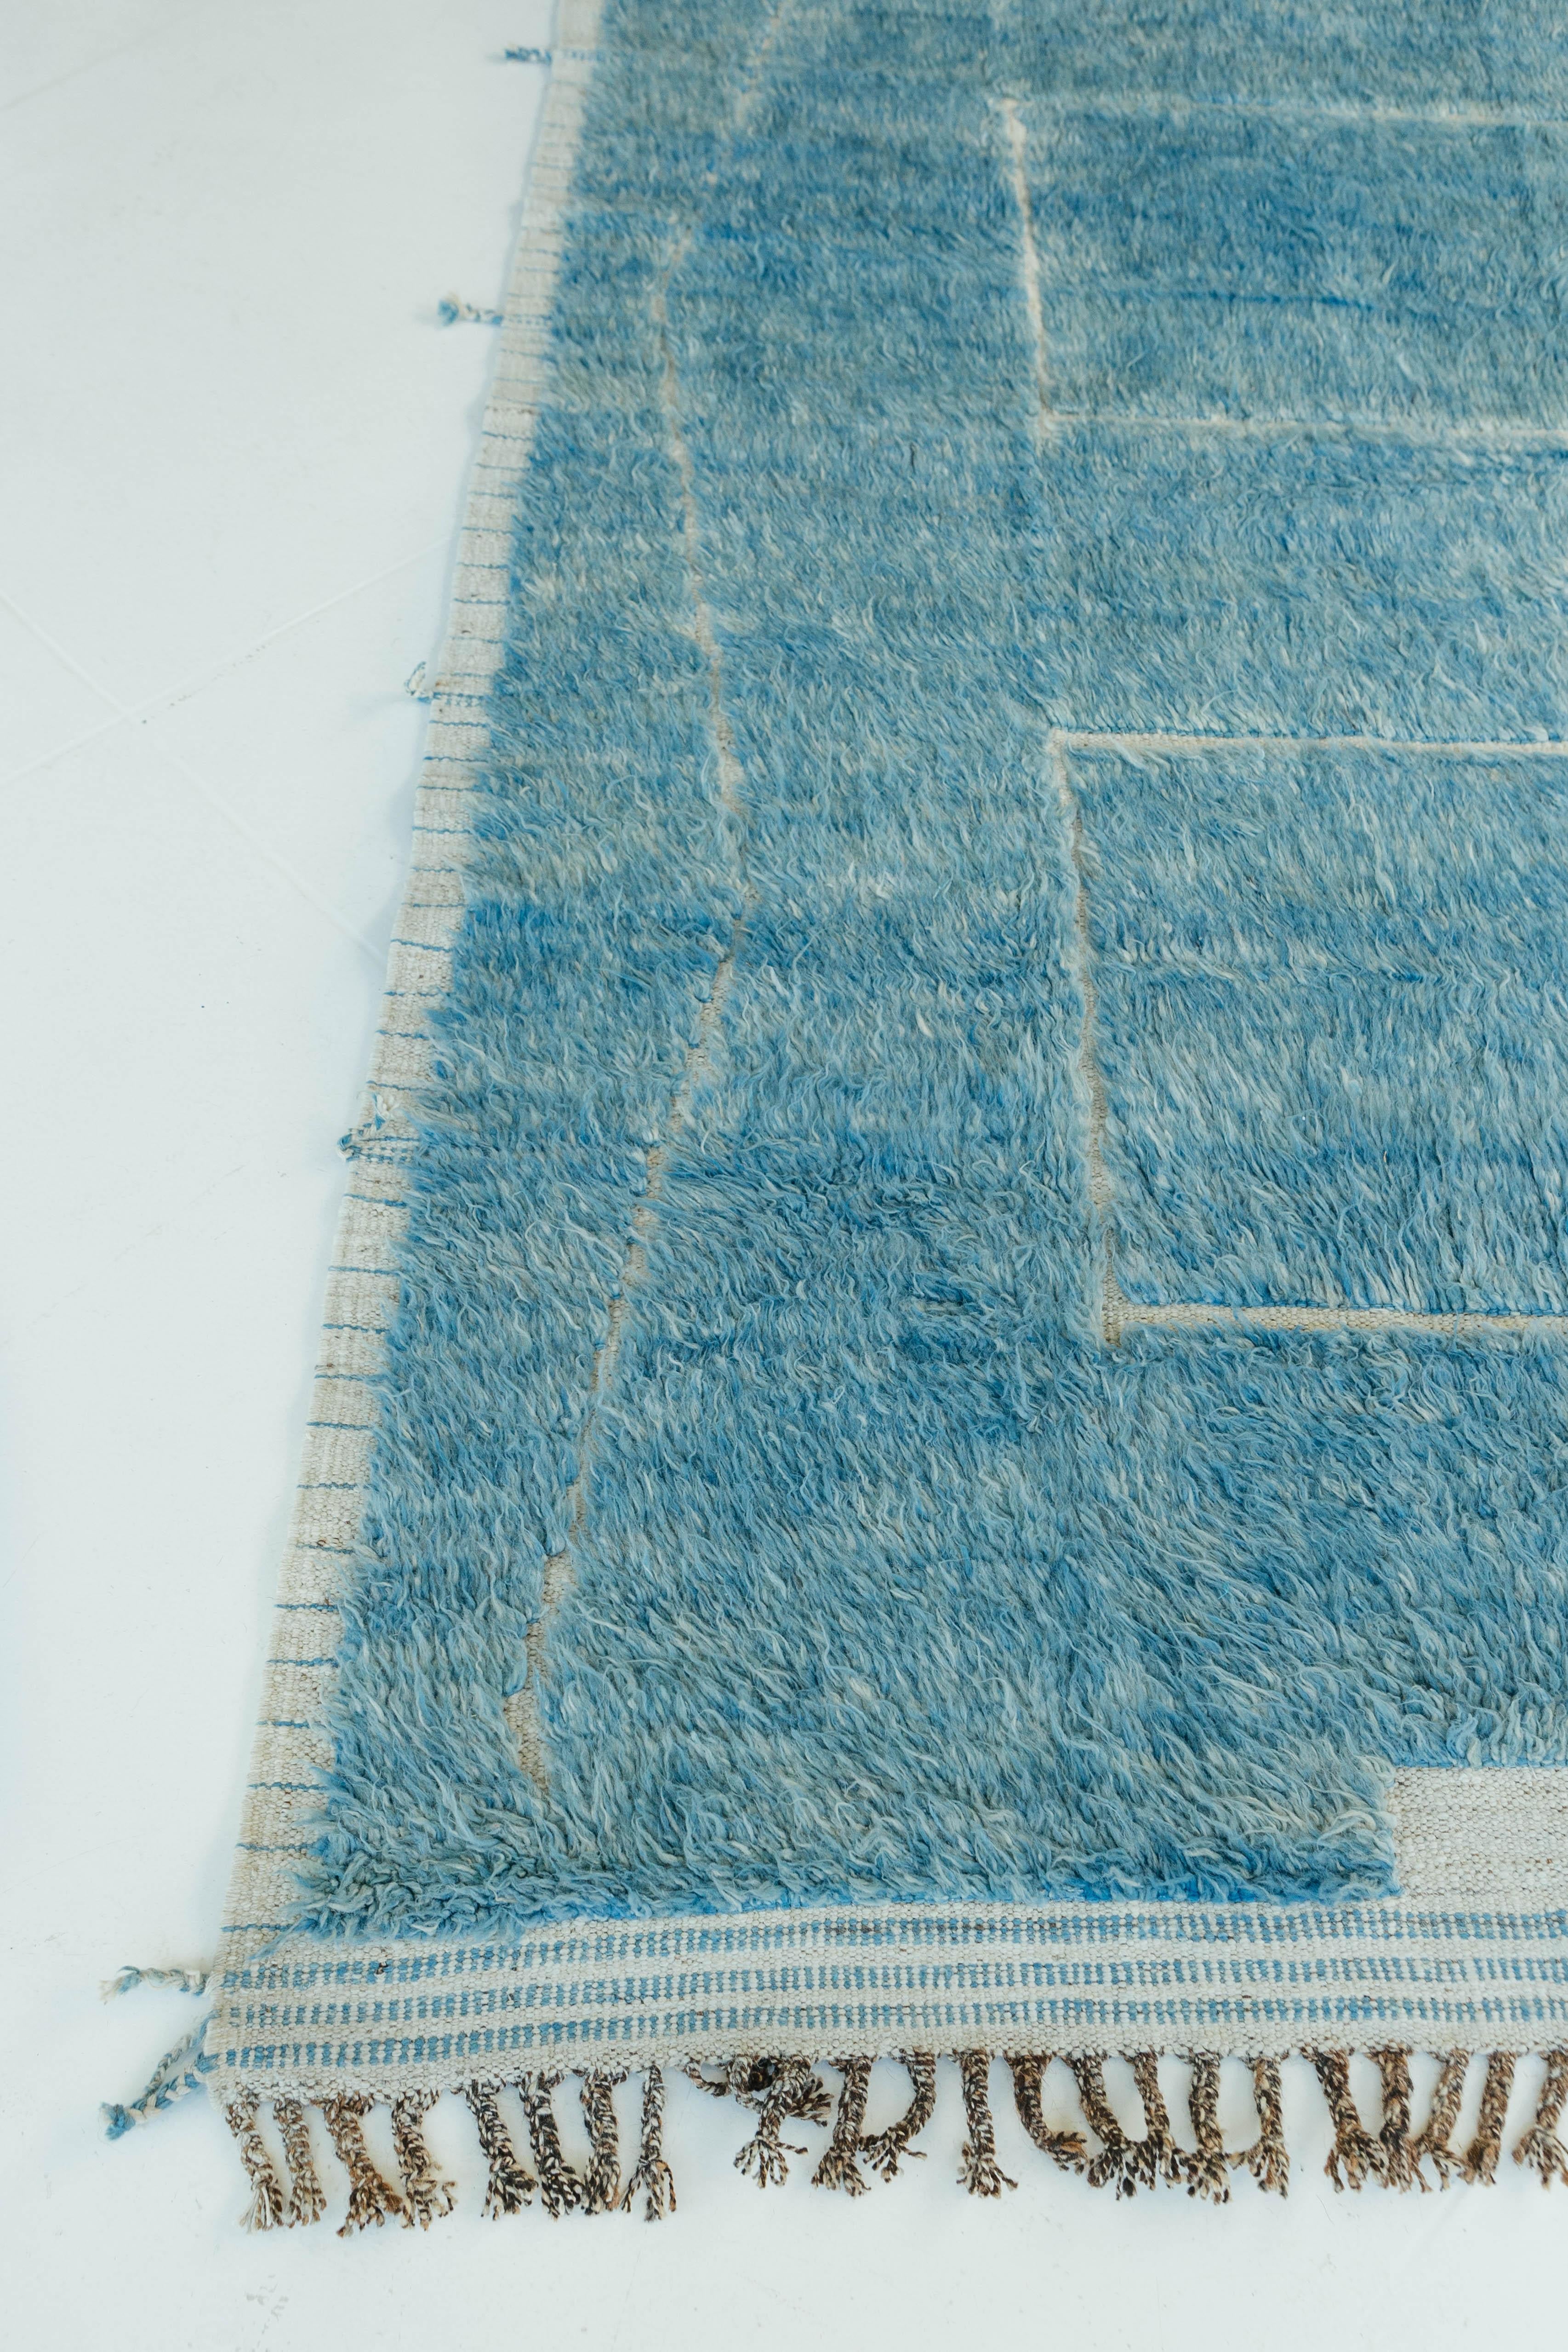 Cierzo is a handwoven wool rug made of an ocean blue shag and a natural white flat-weave seen through the embossed detailing. A part of the Haute Bohemian Collection, designed in California, named for the winds knitting together seasons, trees,